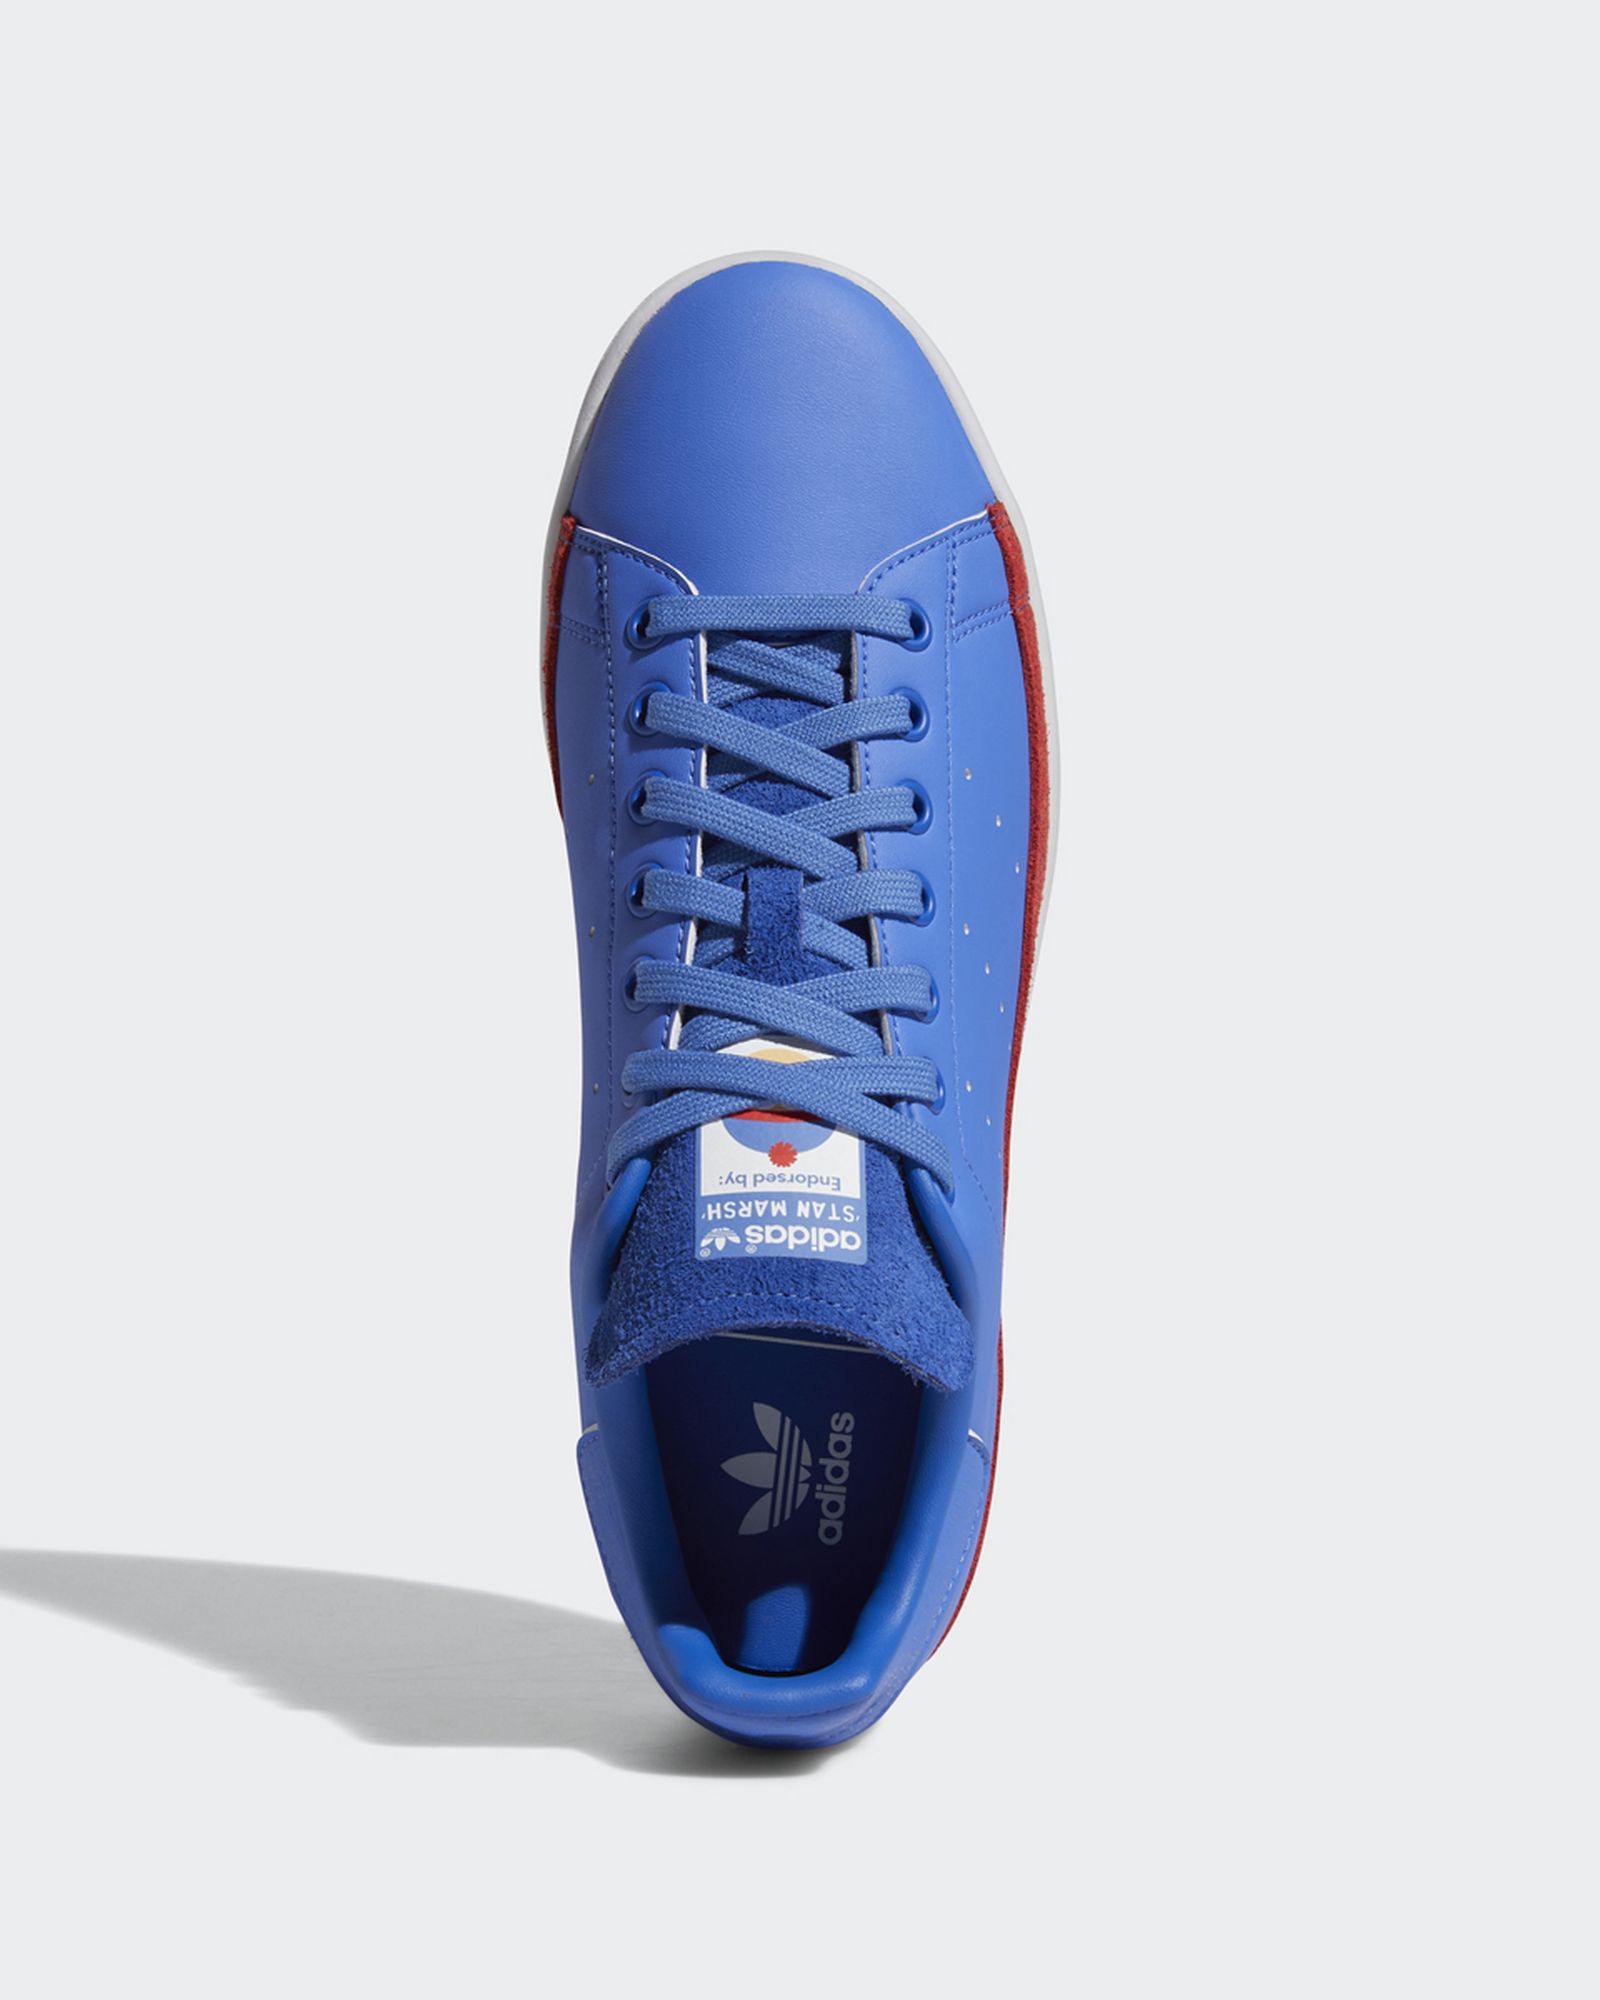 south-park-adidas-shoes-release-date-collection (39)